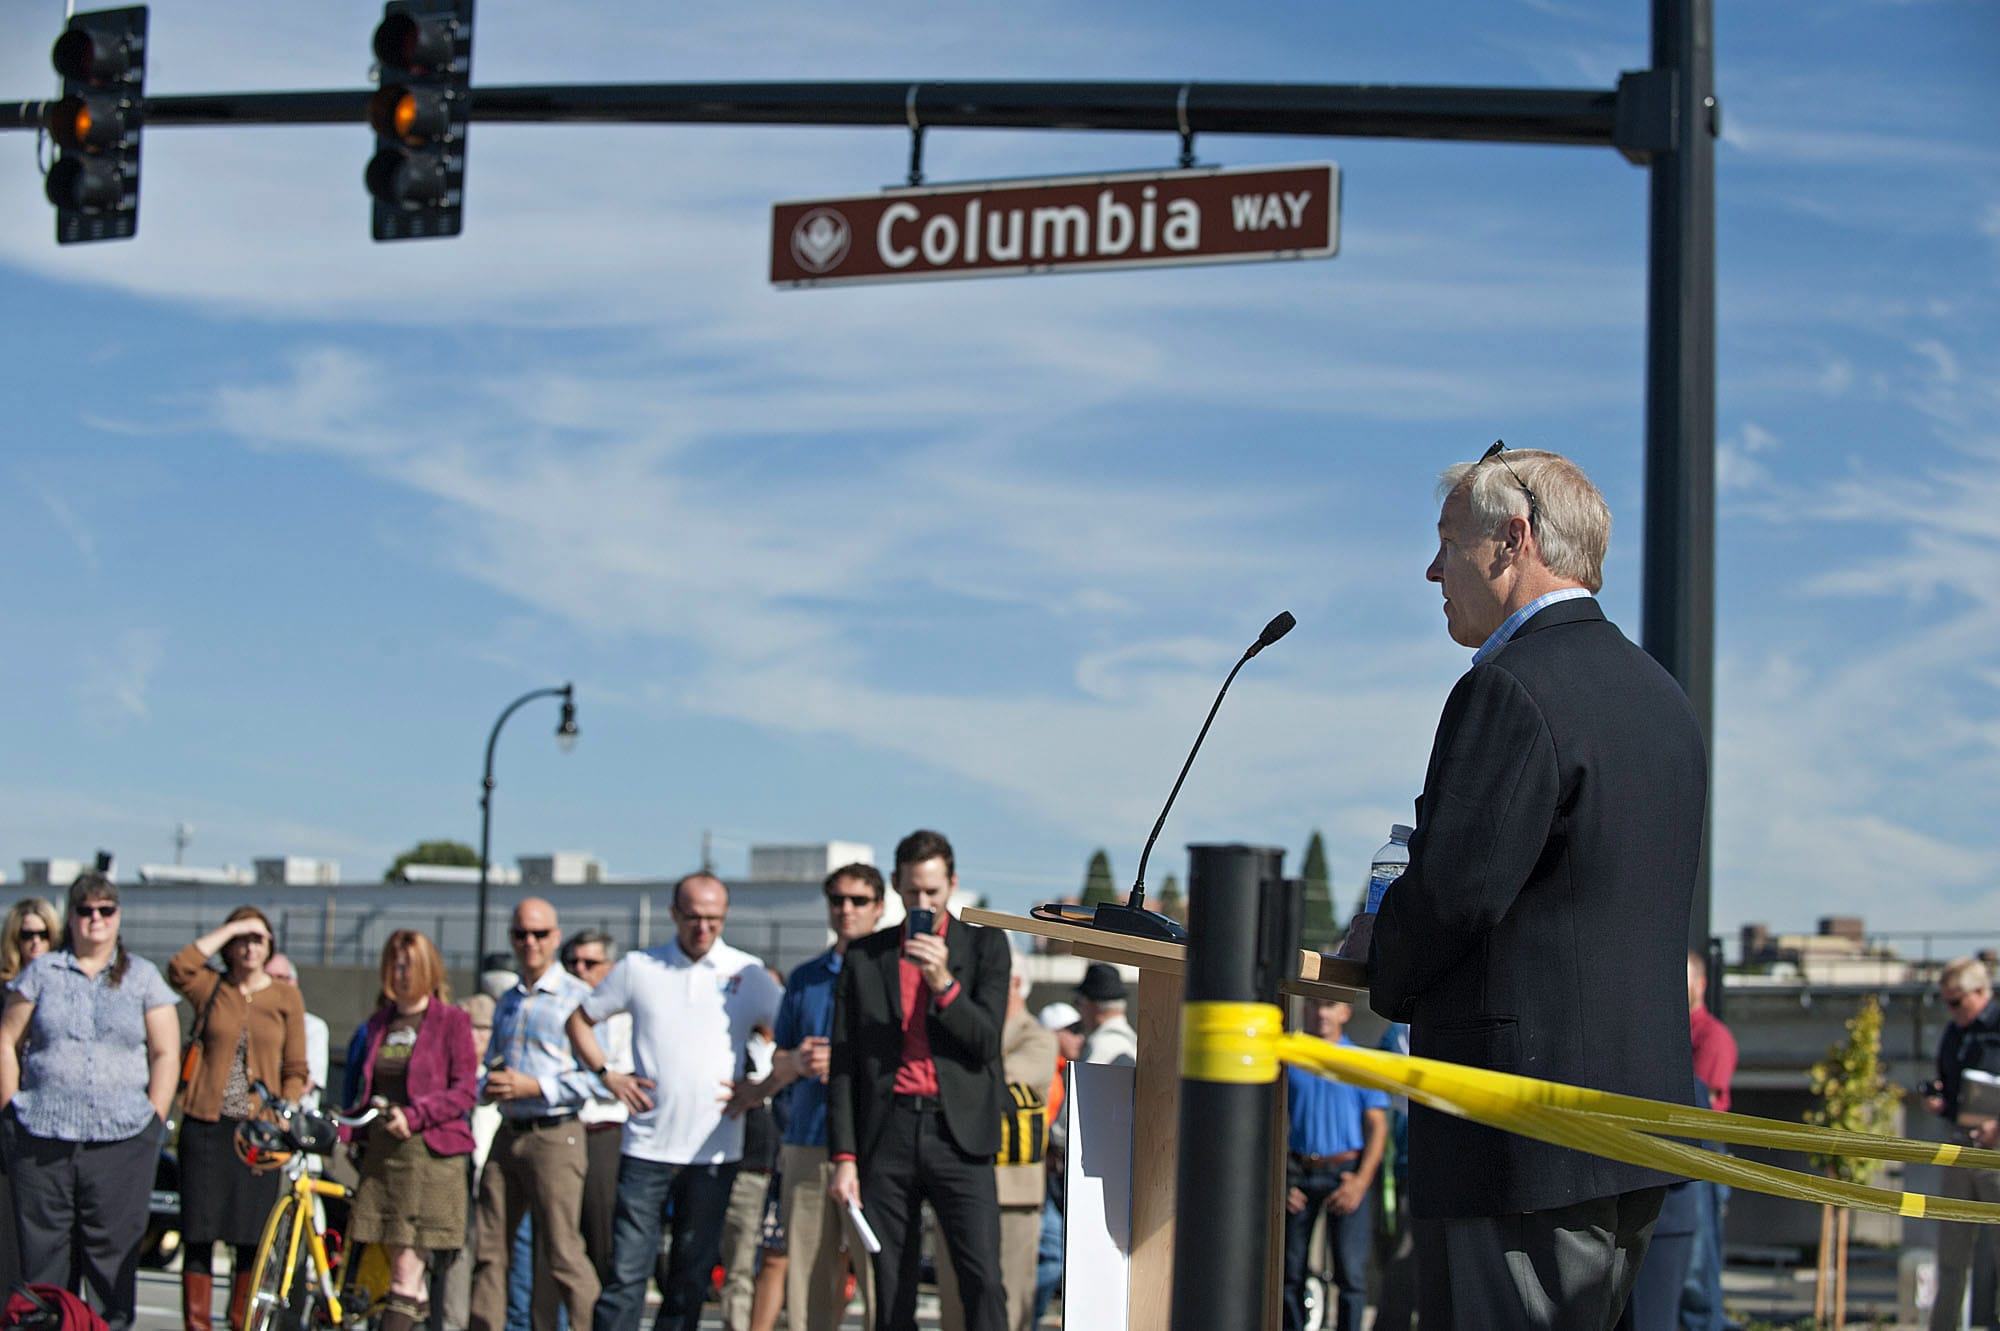 Barry Cain of Gramor Development speaks to the crowd along Columbia Way before the ribbon cutting Thursday morning, Sept. 24, 2015.